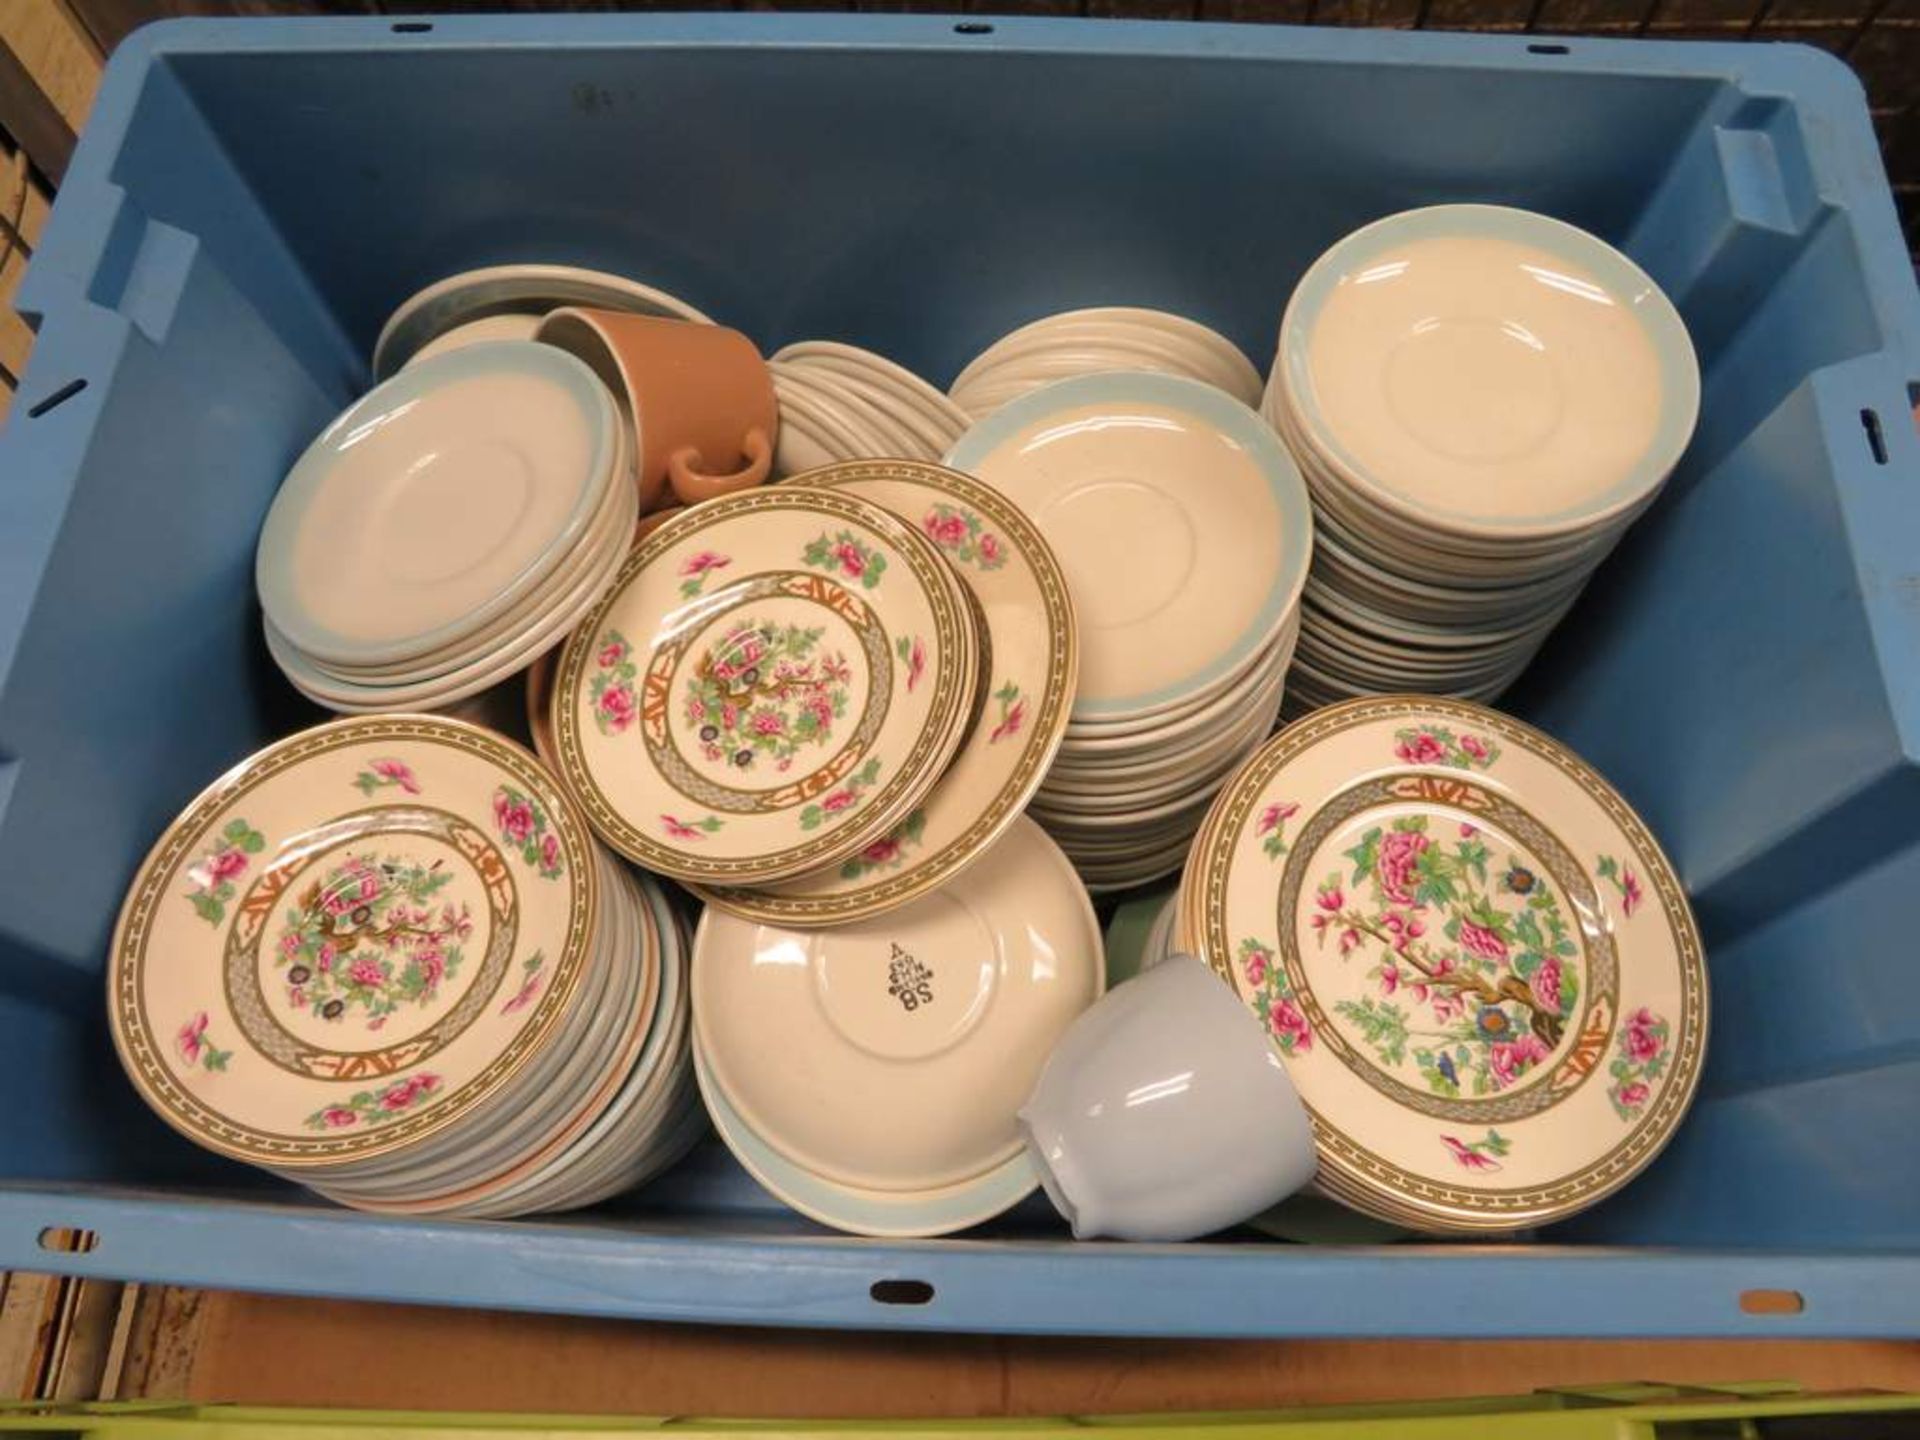 Catering Equipment - Plates, Bowls, Cups, Etc - Image 2 of 6